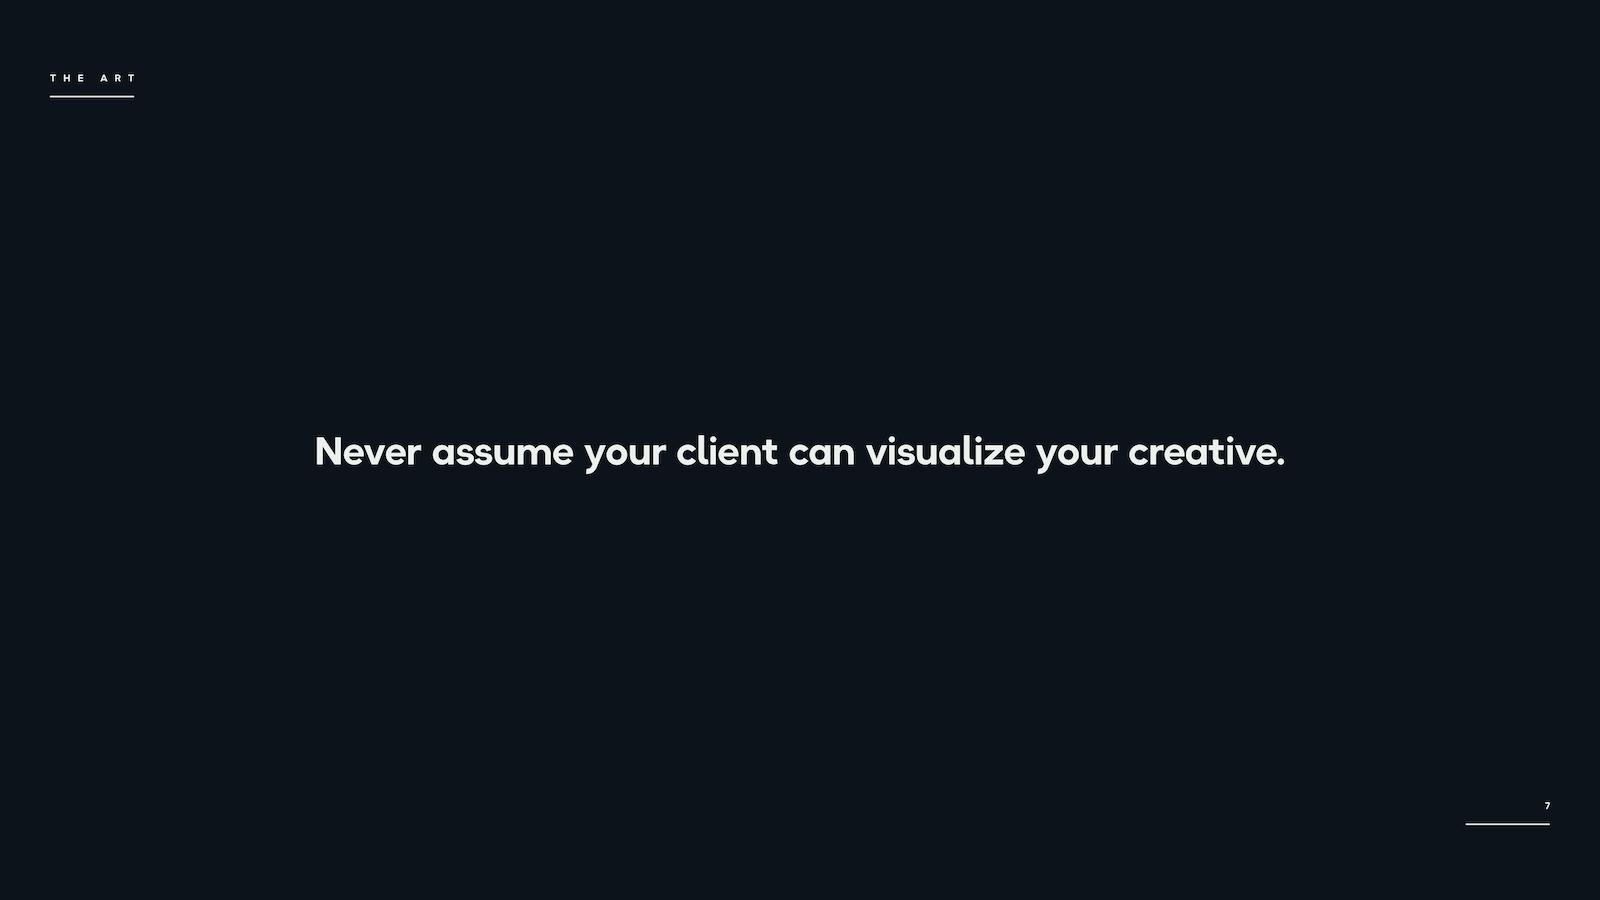 Never assume your client can visualize your creative.